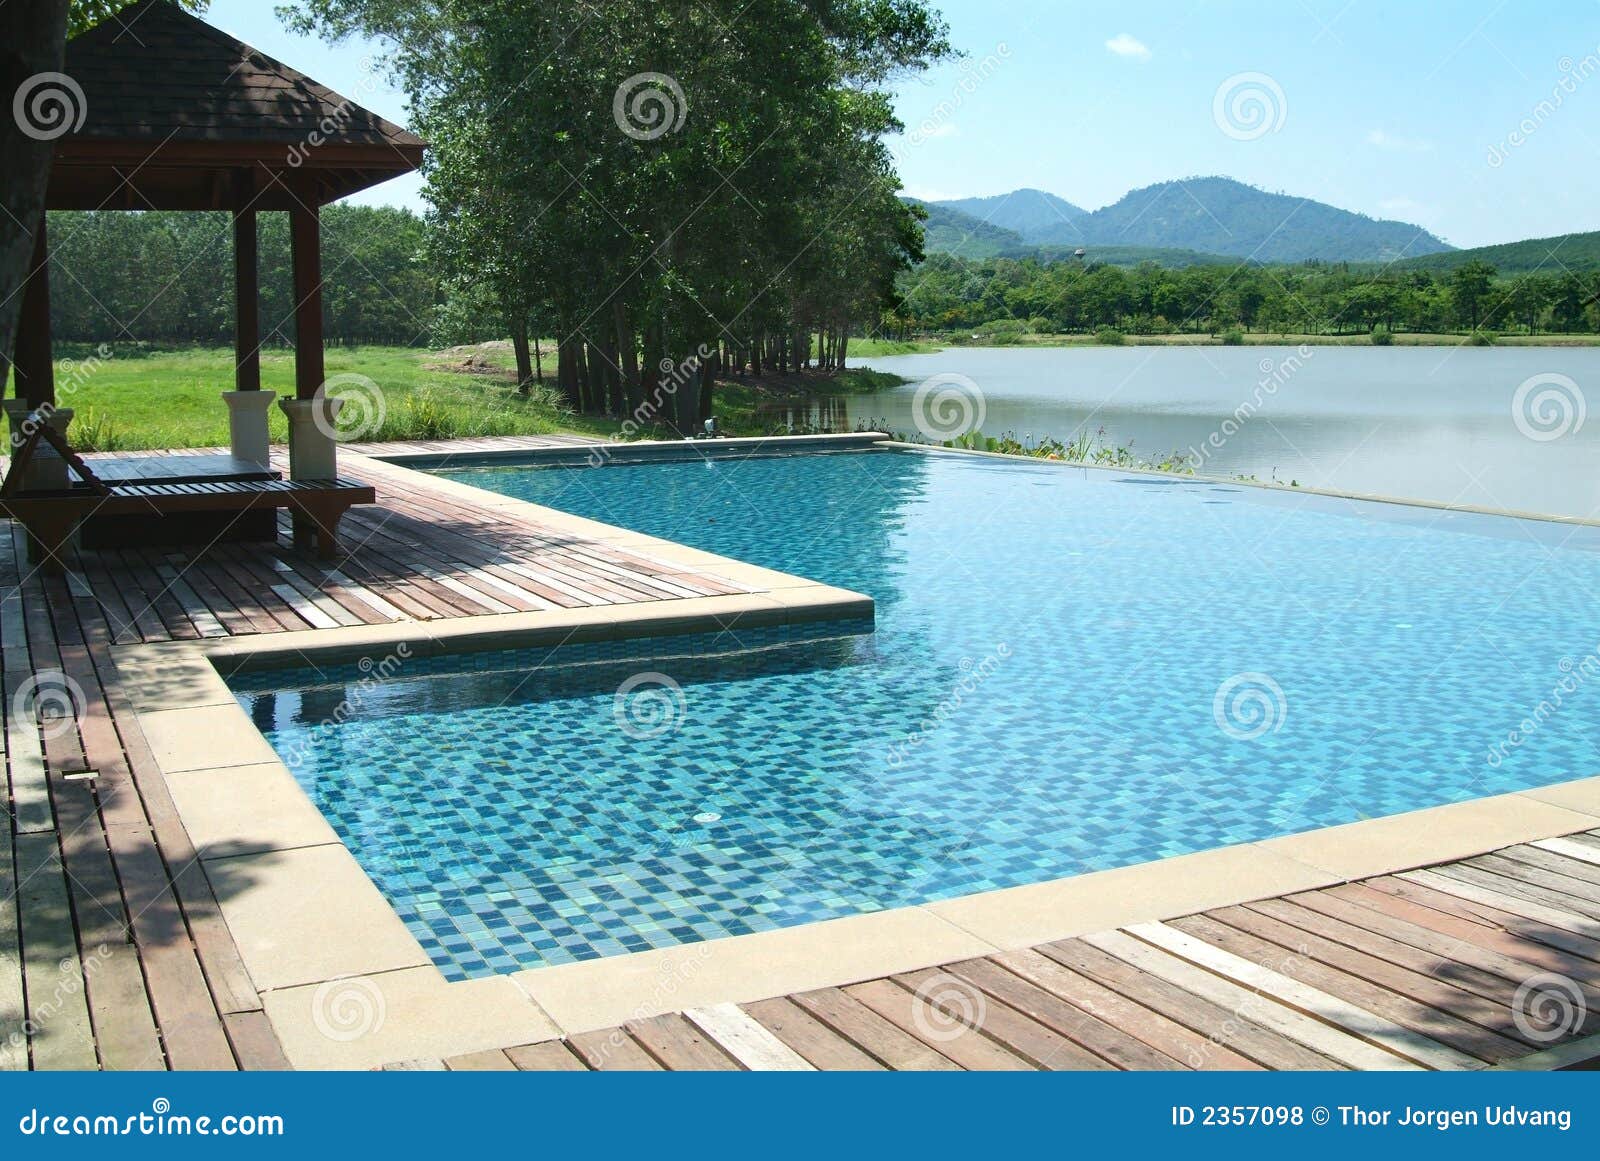 Swimming Pool In Beautiful Sce Royalty Free Stock Photos - Image ...